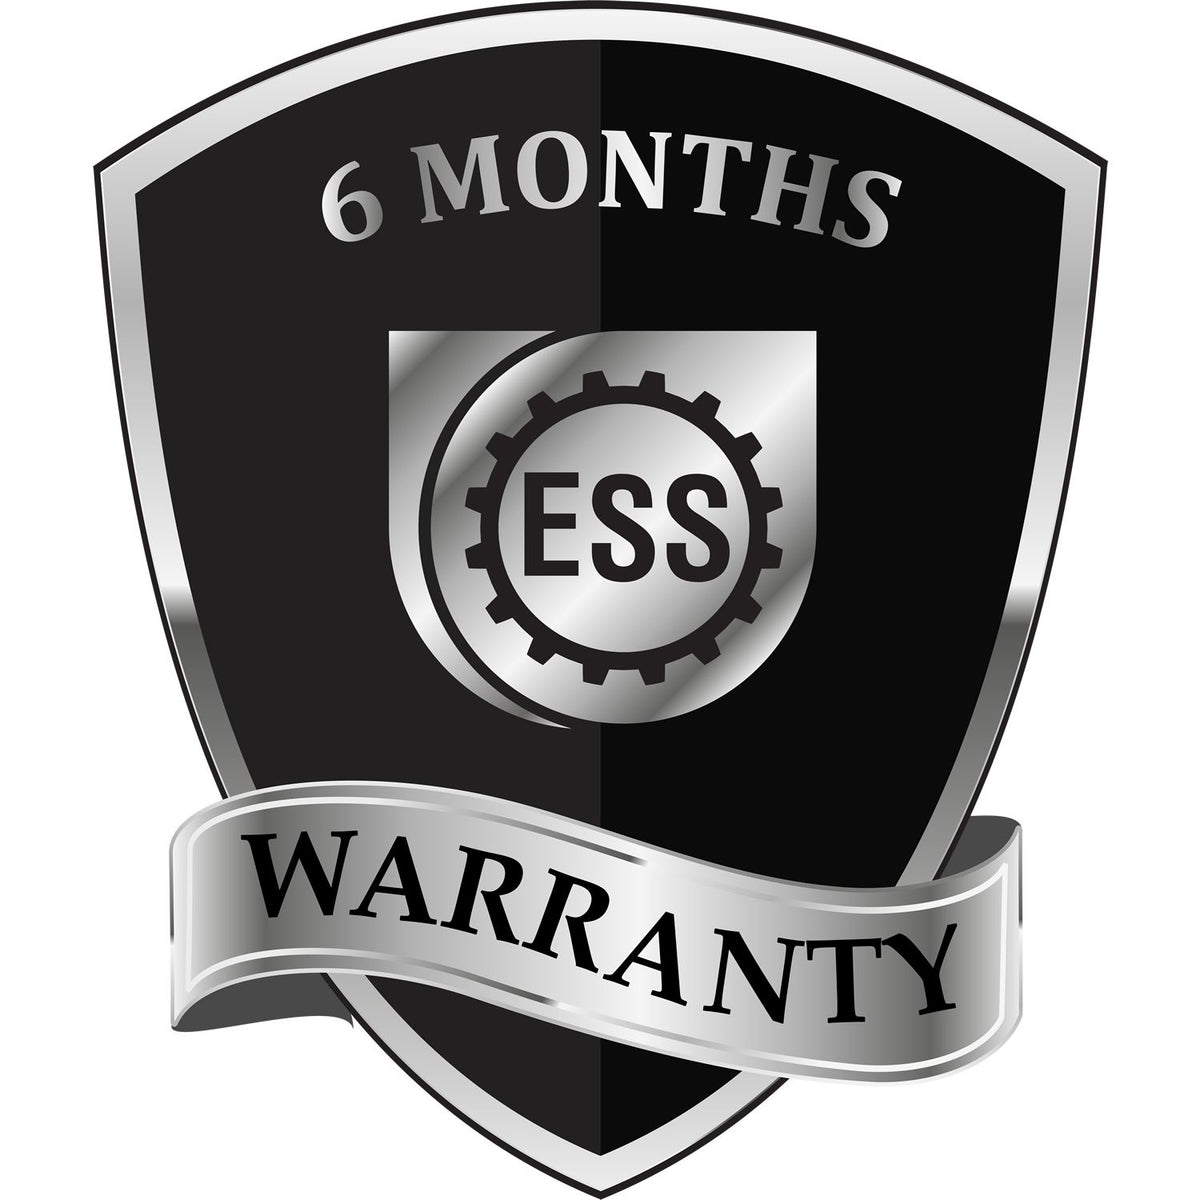 A badge or emblem showing a warranty icon for the PSI Texas Notary Stamp